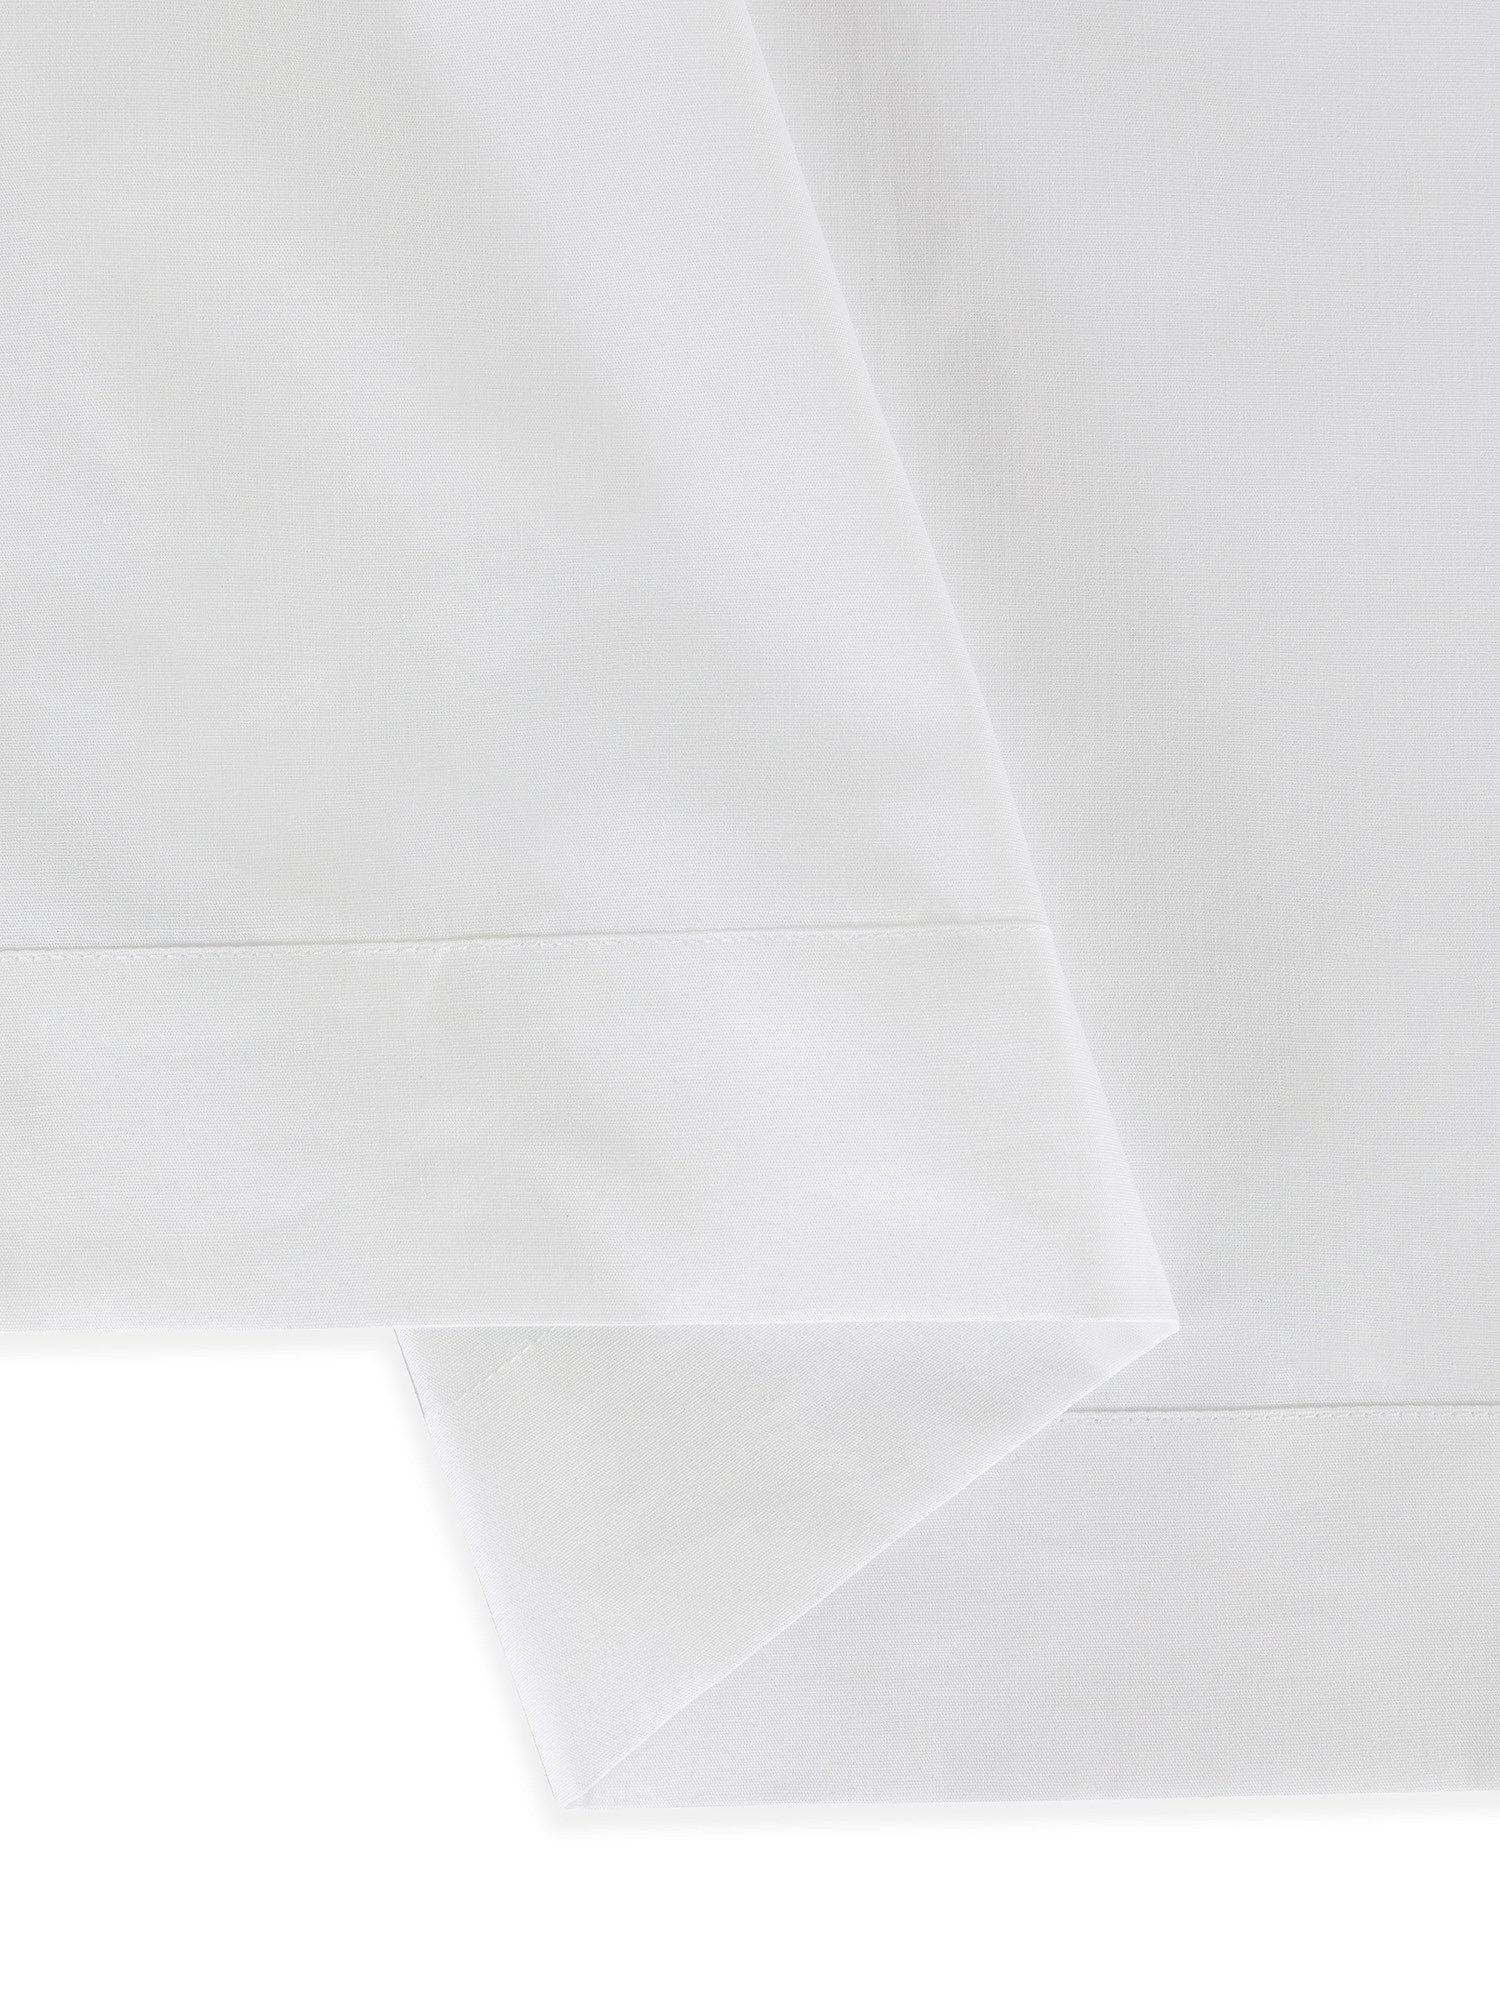 Solid color cotton percale sheet set, White, large image number 2